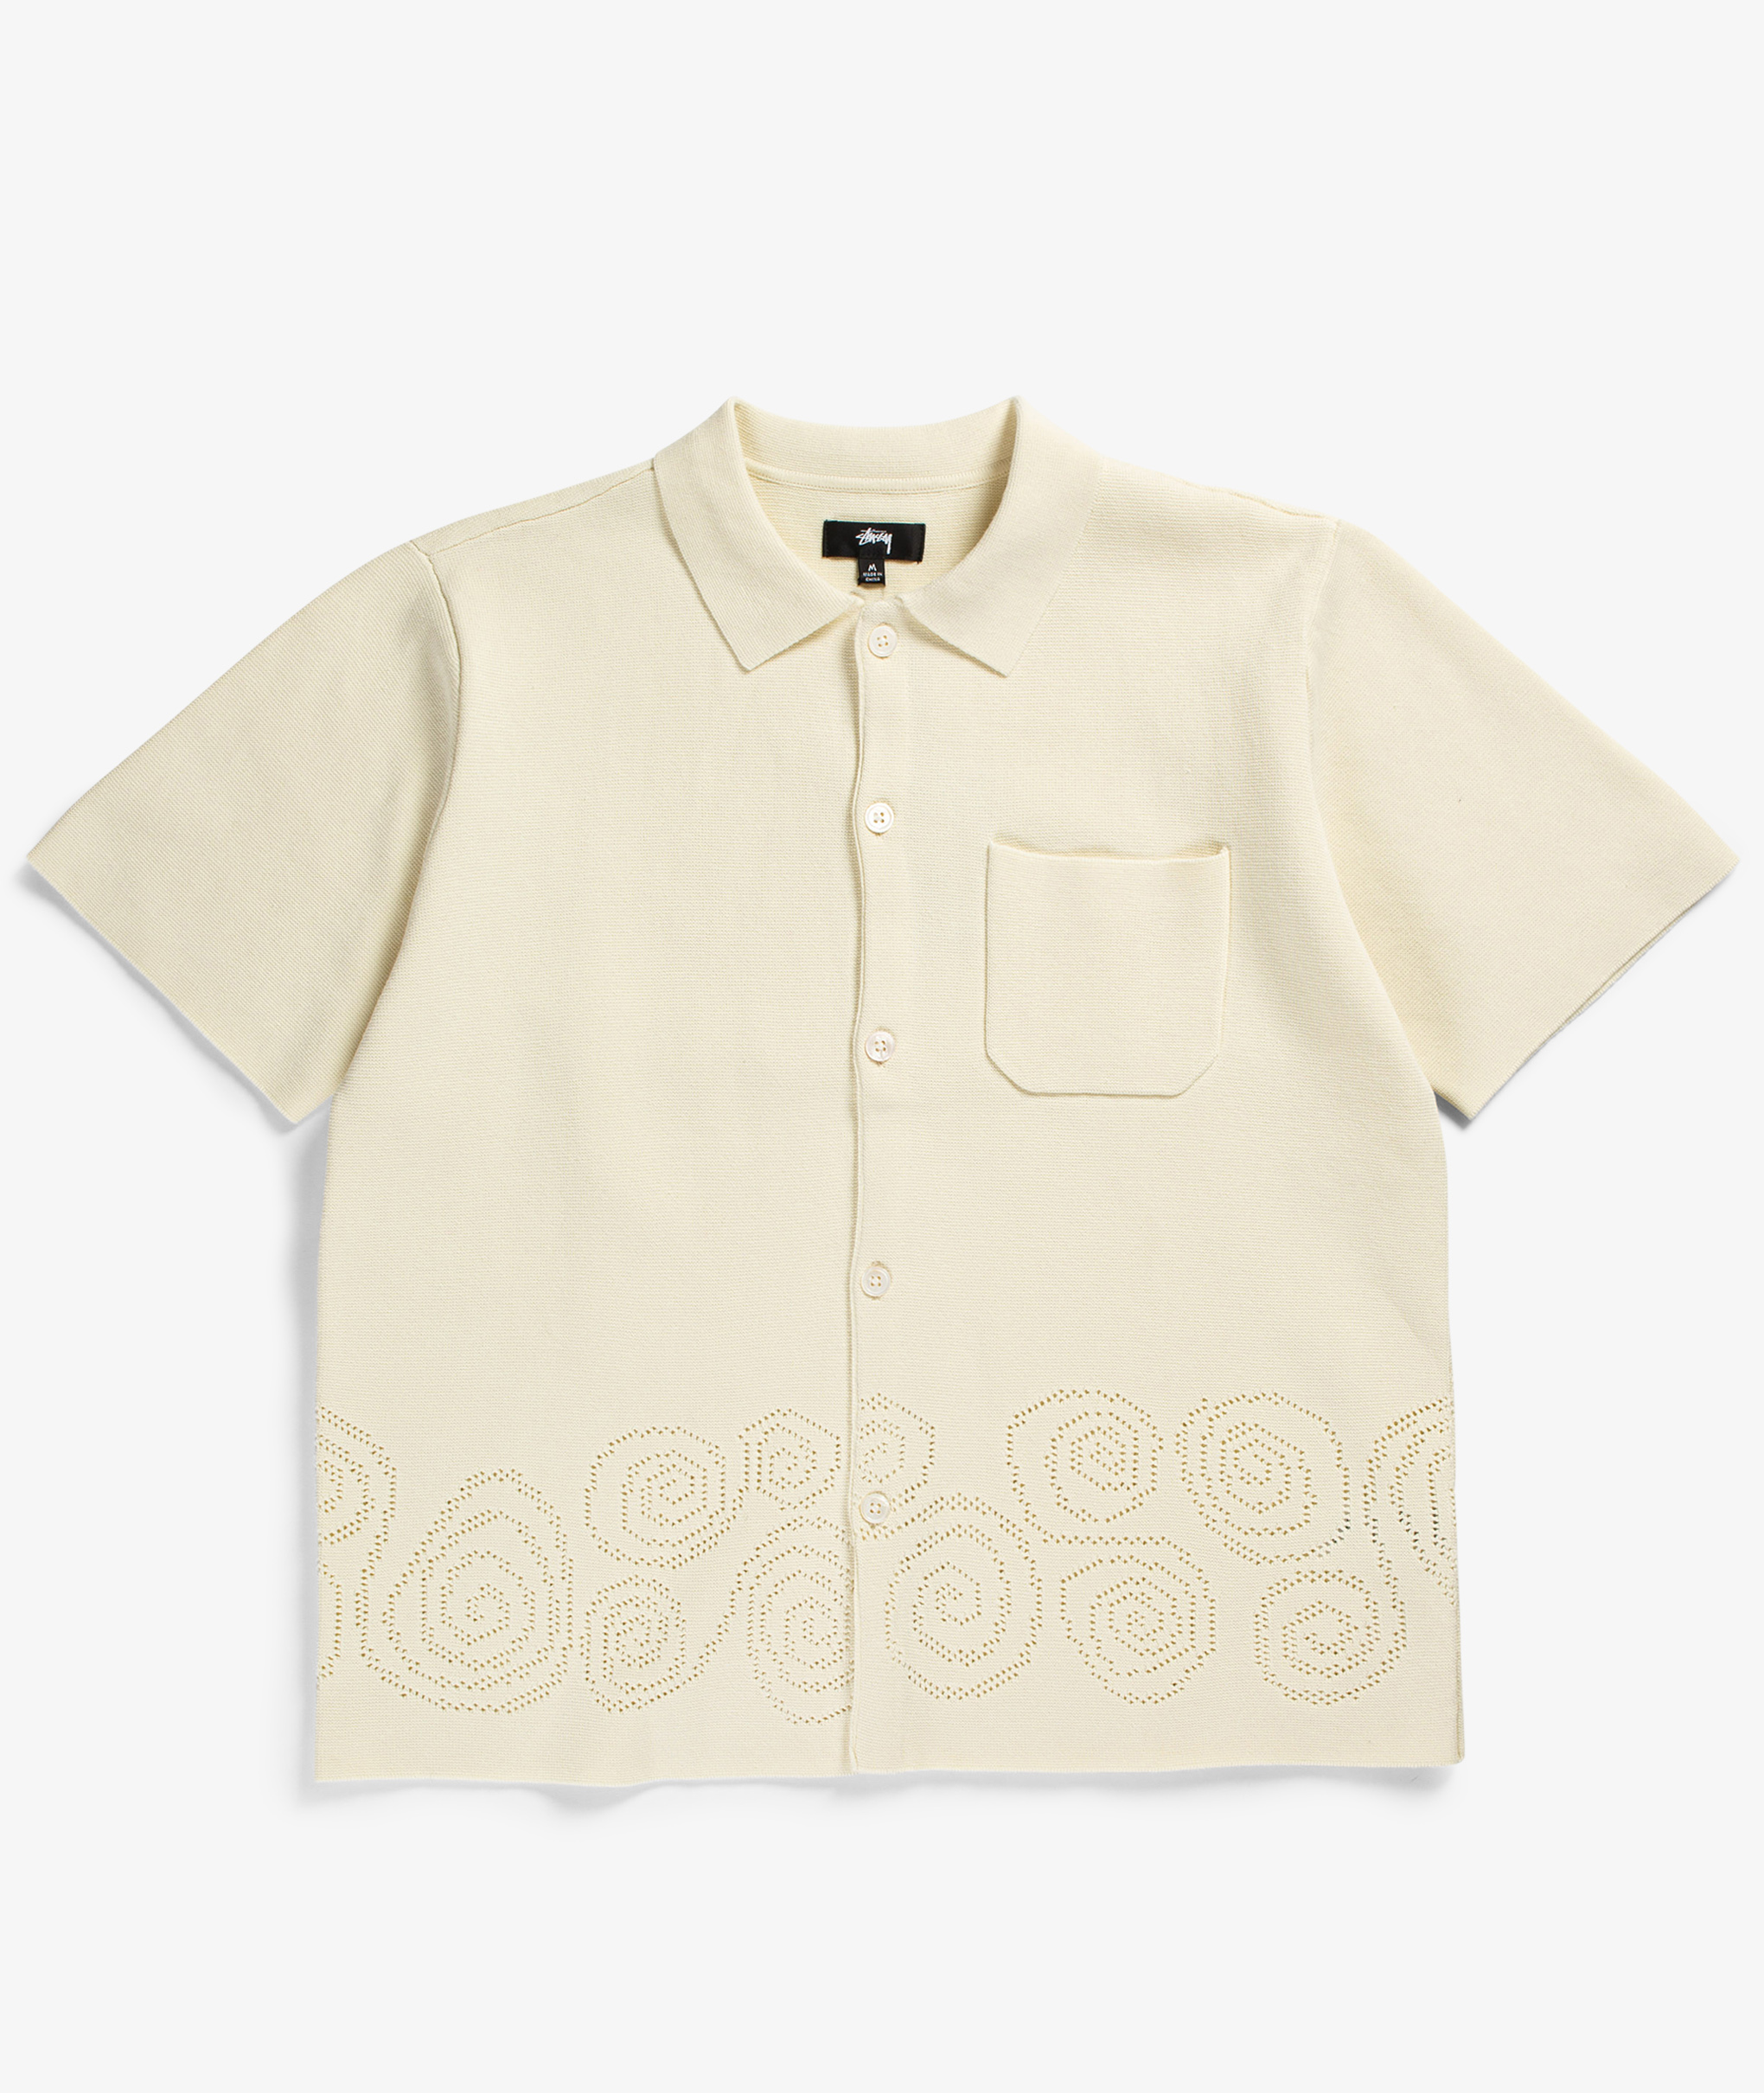 Norse Store  Shipping Worldwide - Stüssy Perforated Swirl Knit Shirt -  Natural